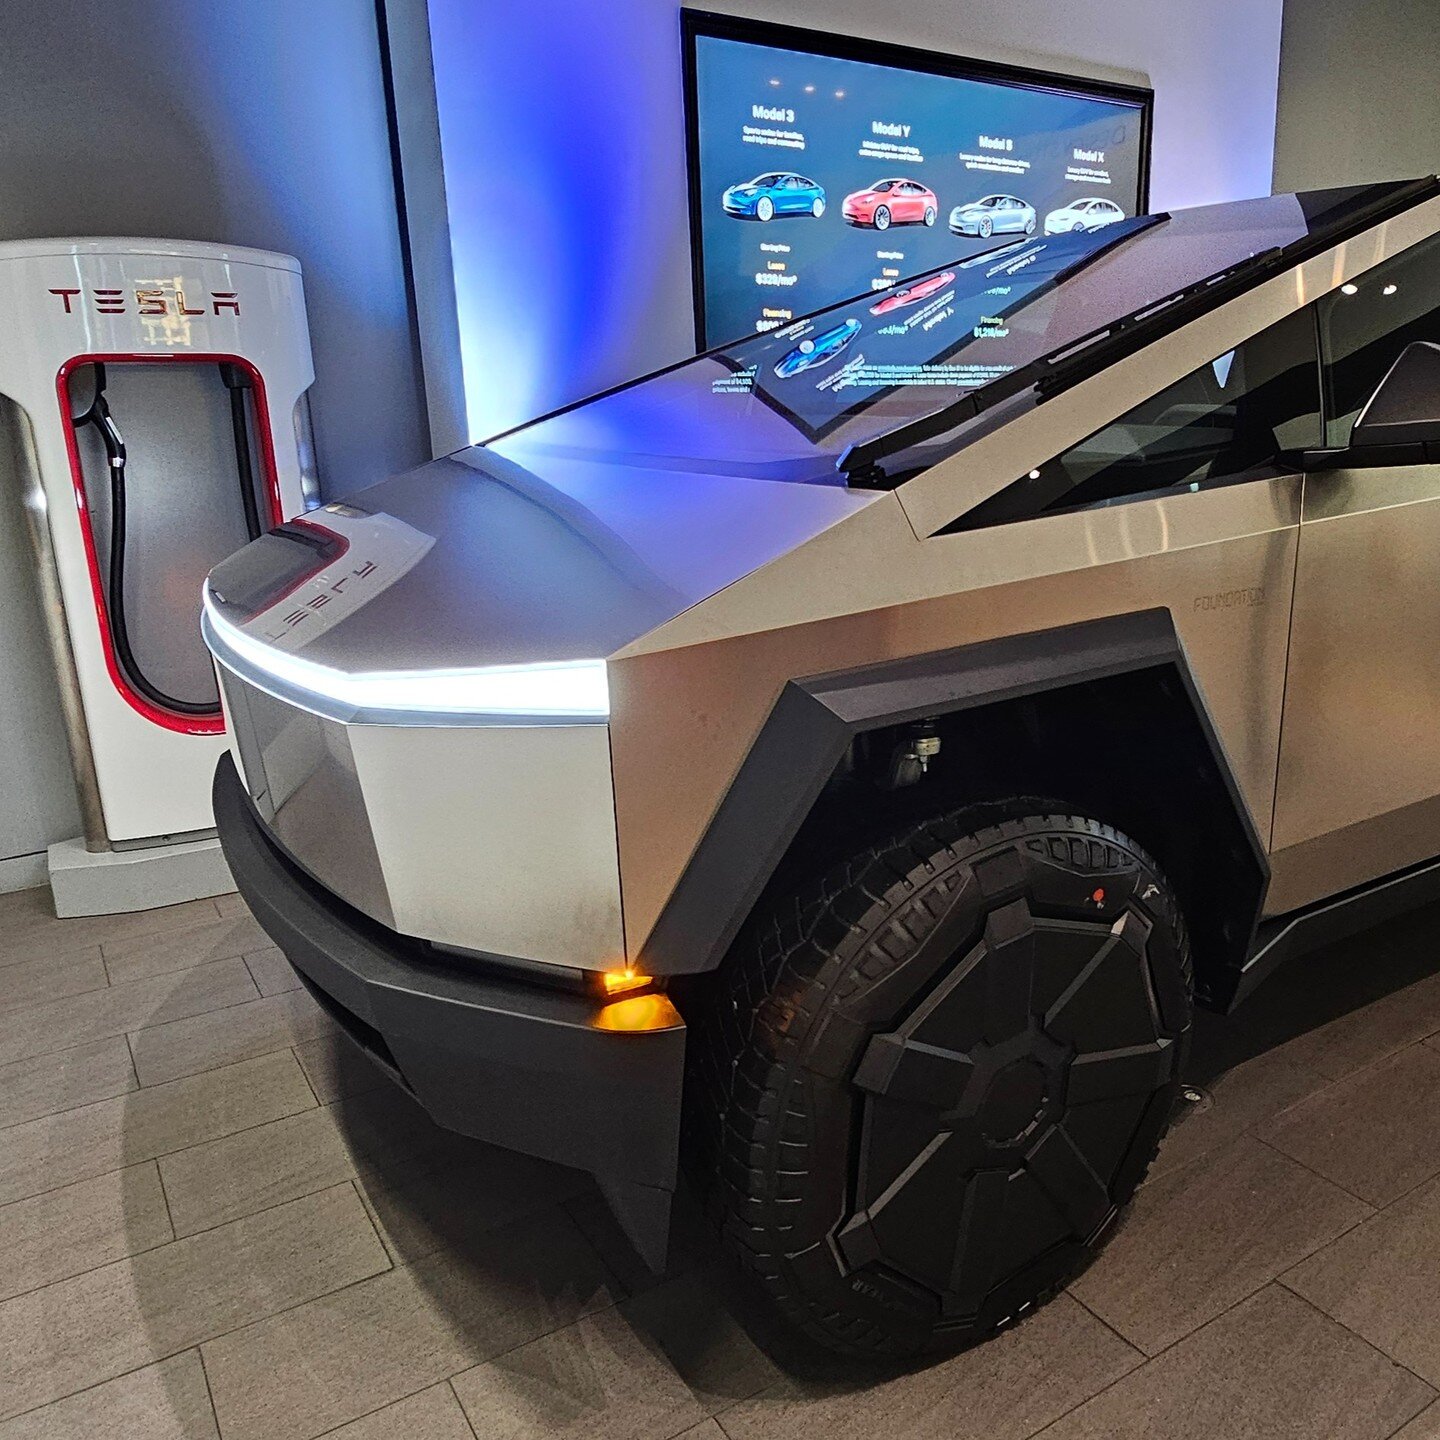 Should I trade my 1994 @ford Ranger (affectionately known as the &quot;Mayor Mobile&quot;) for the new @teslamotors Cybertruck? 🤔

It's not every day you see a vehicle that looks like it's straight out of a sci-fi movie. The #Cybertruck would defini